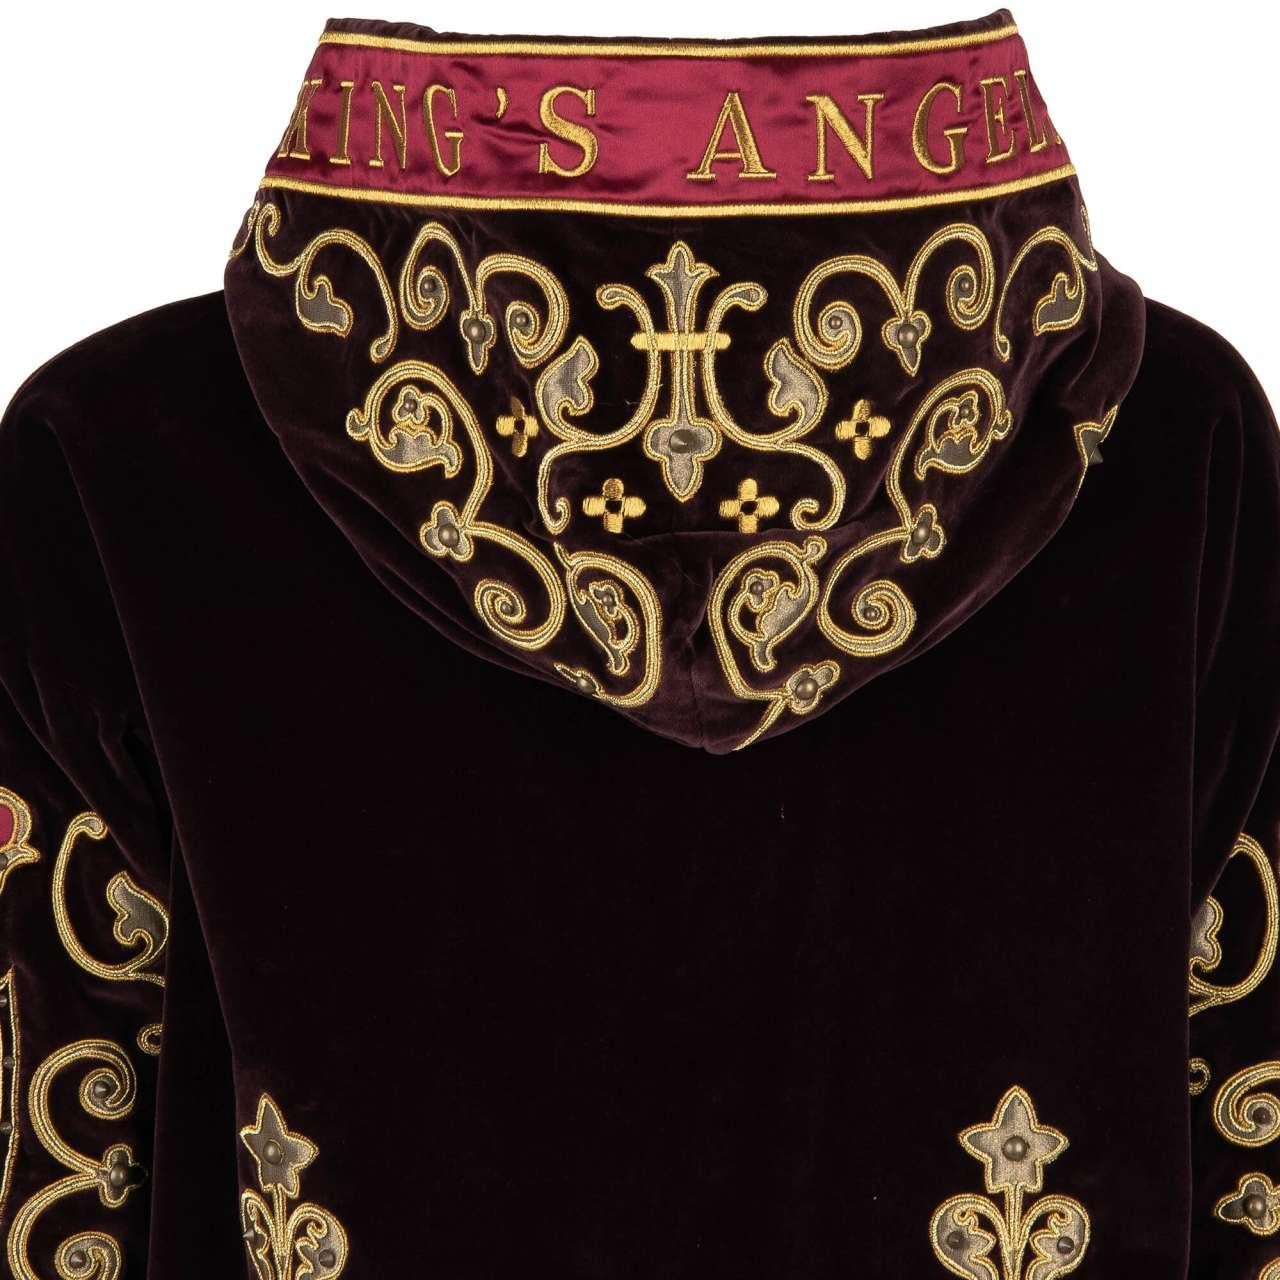 D&G Velvet Hoody Sweater with San Michele Crown King Embroidery Bordeaux Gold 52 For Sale 3